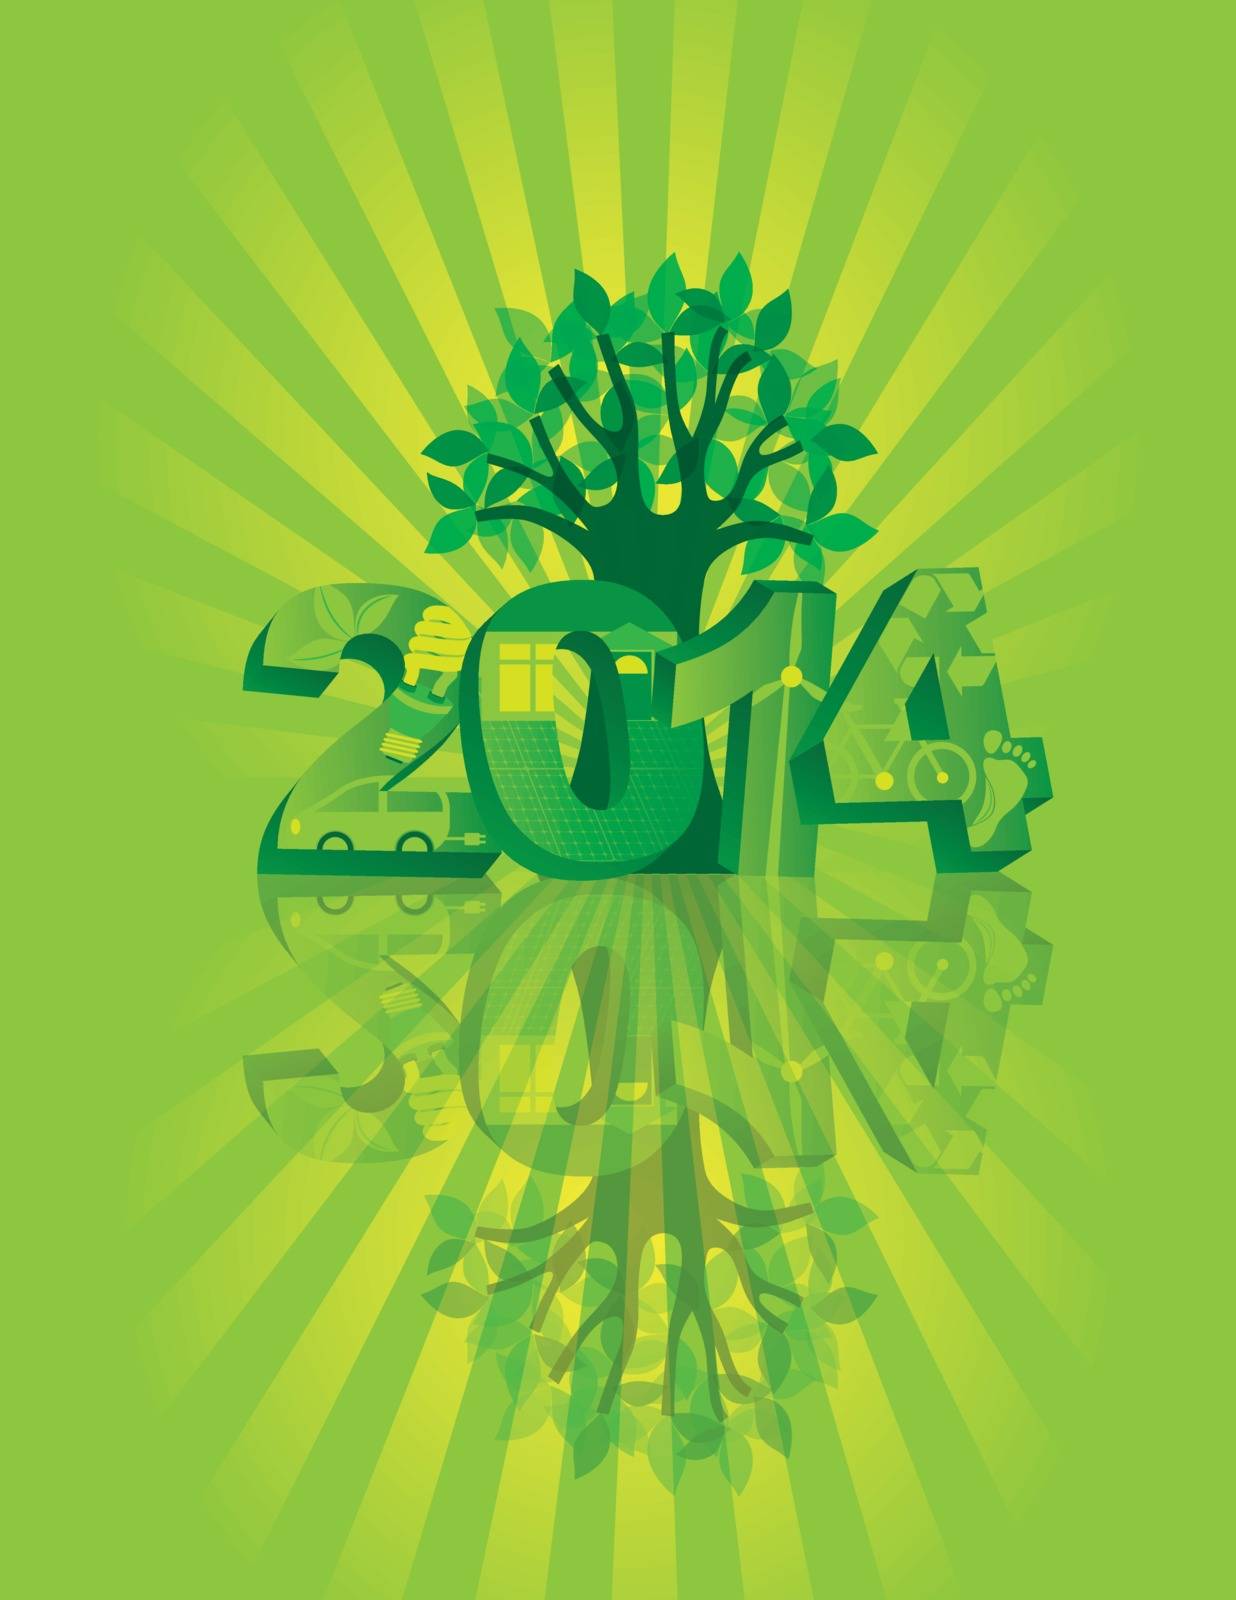 2014 Go Green with Symbols and Tree Sunray Background by jpldesigns